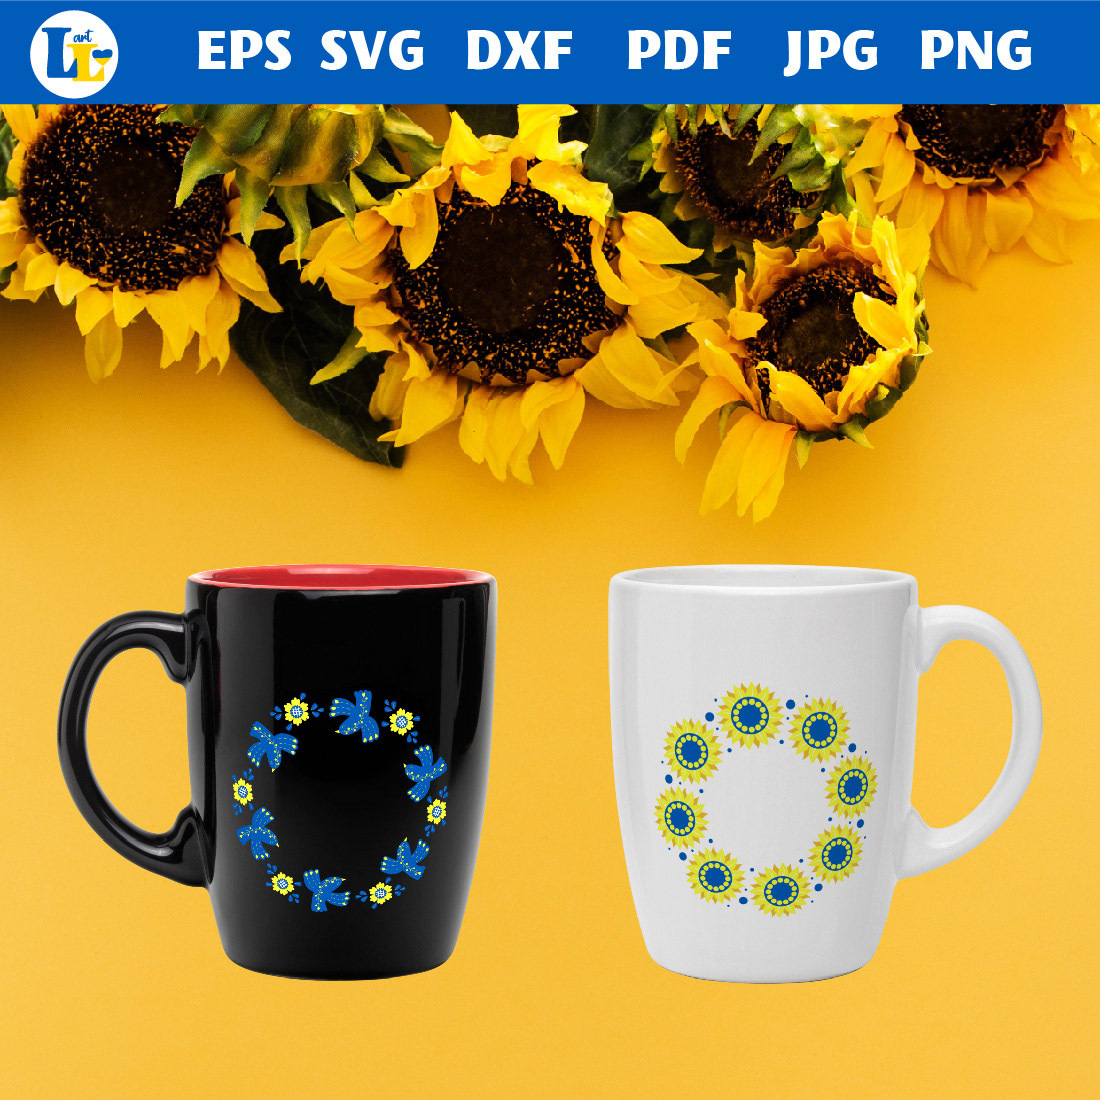 Round Frames with Yellow-Blue Birds and Sunflowers cup mockups.